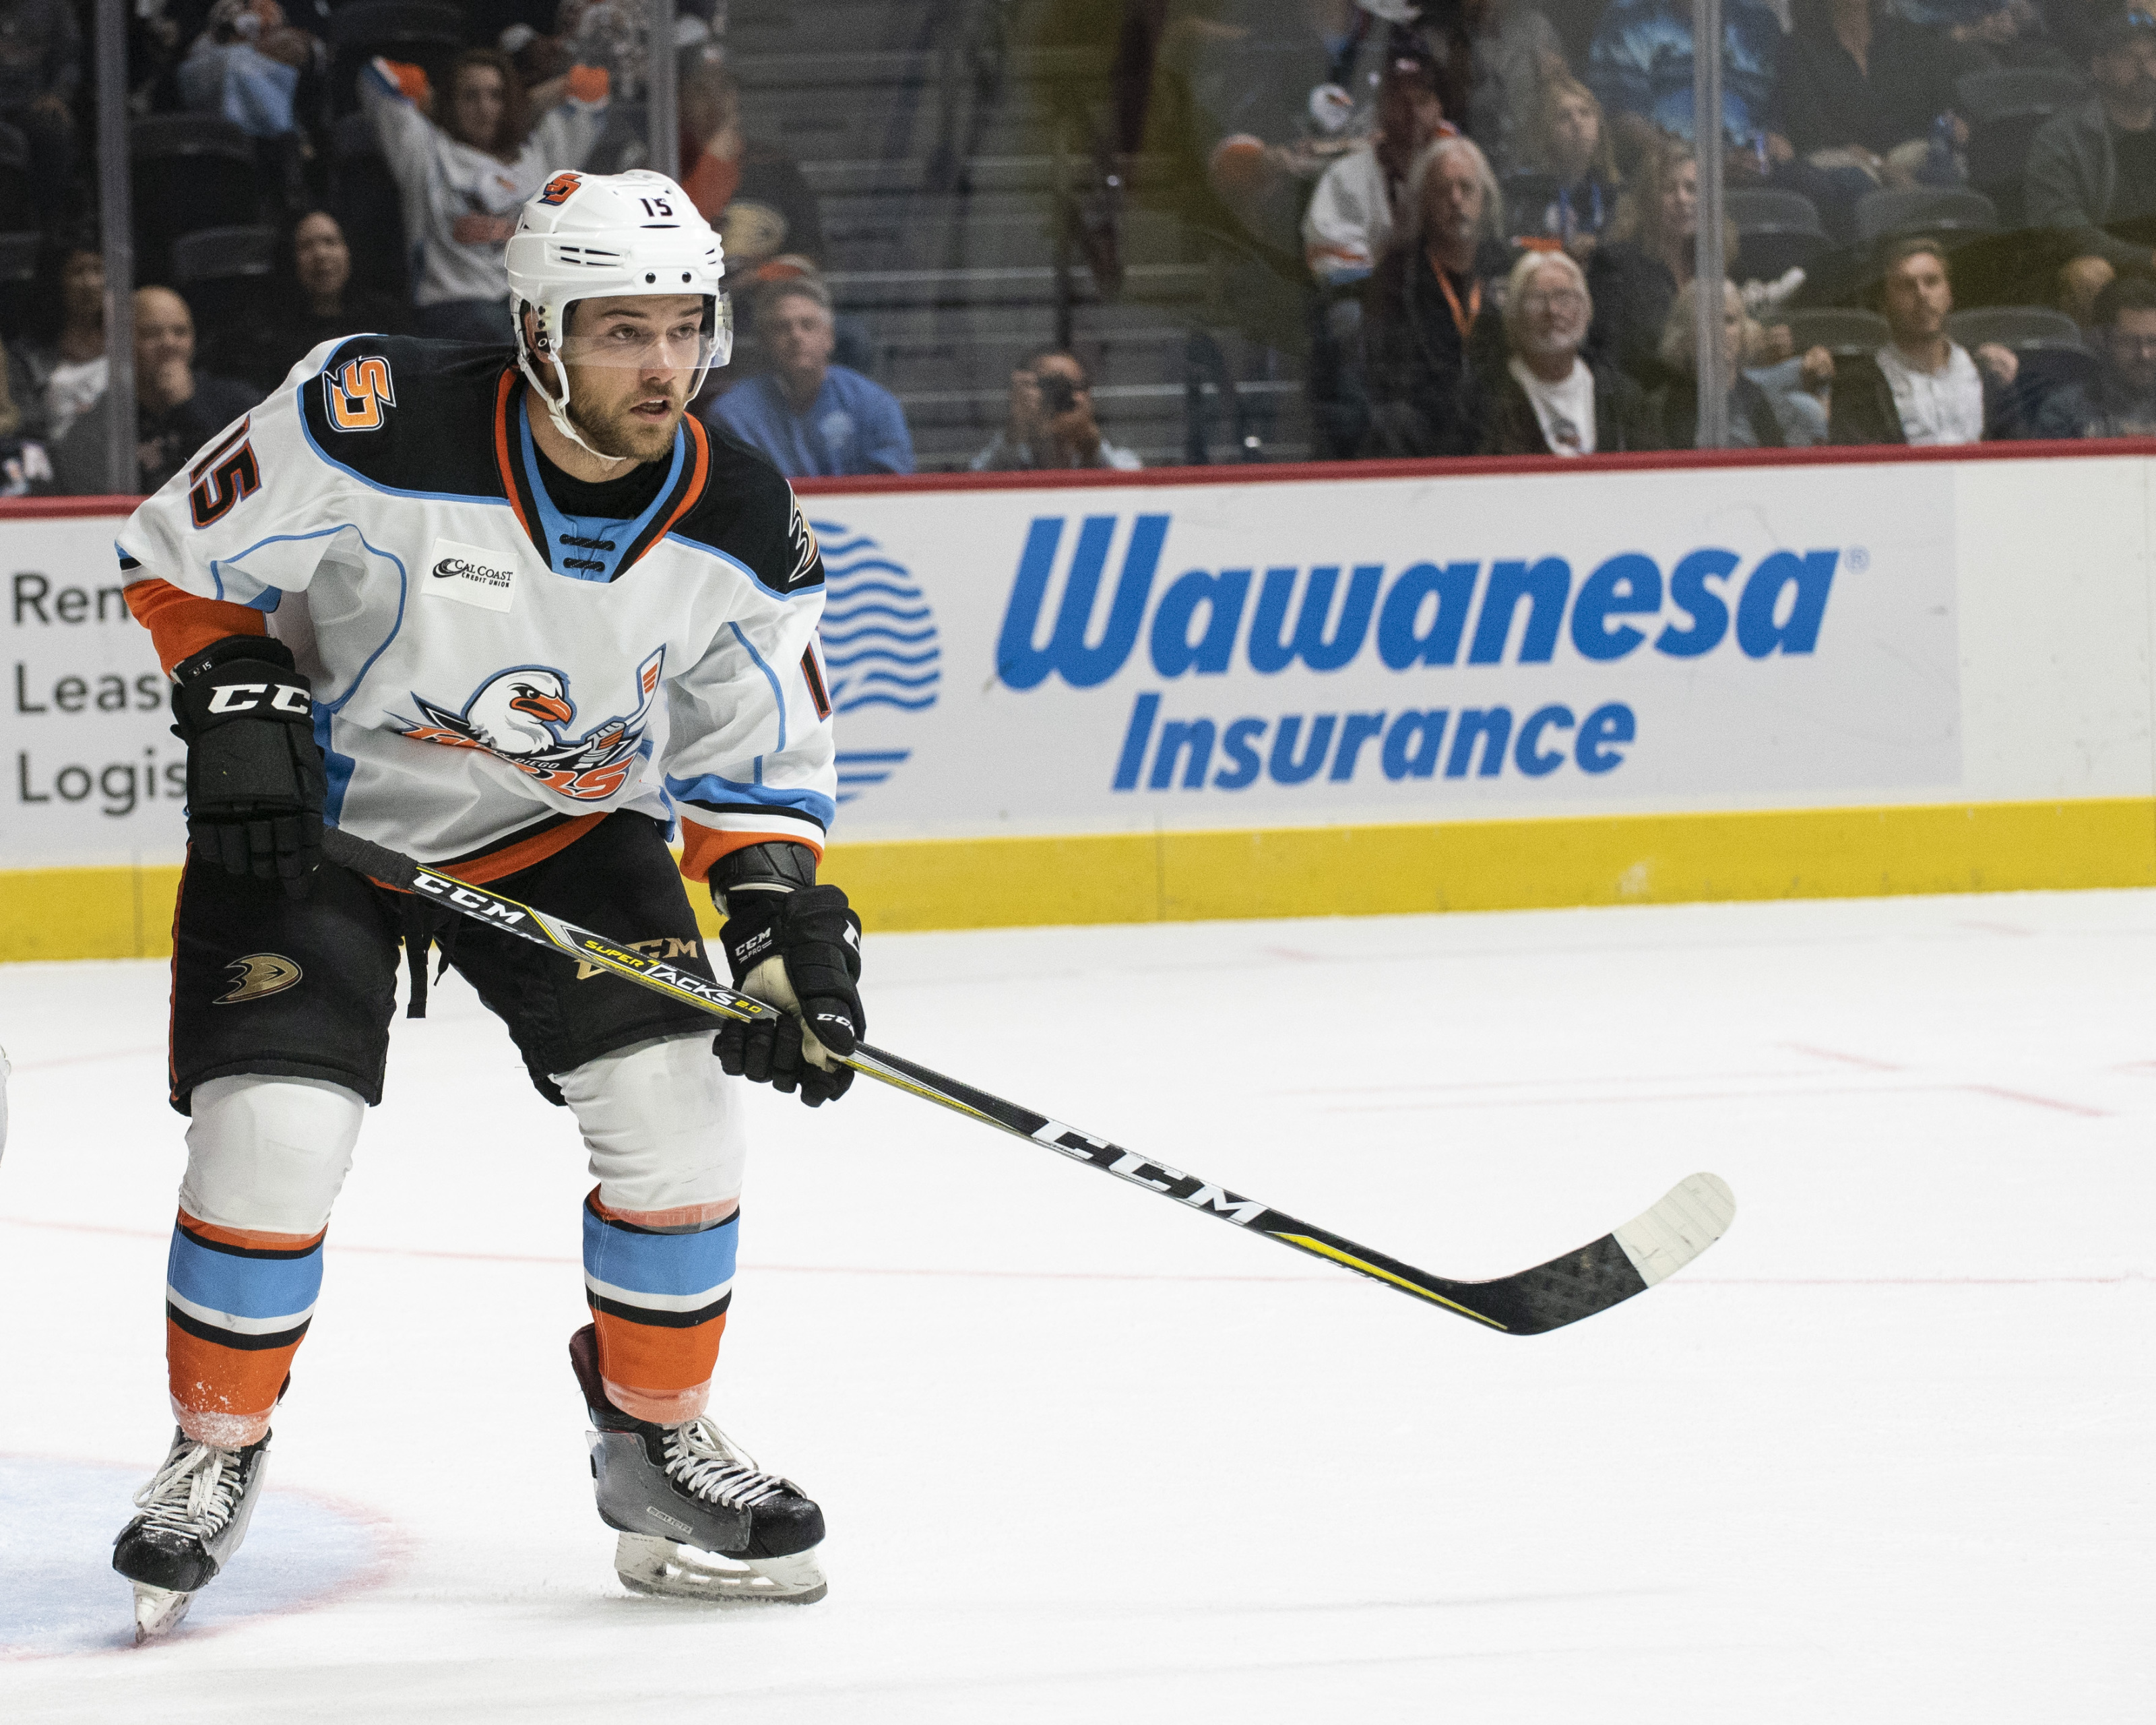 PREVIEW: Gulls, Heat Face Off In Stockton